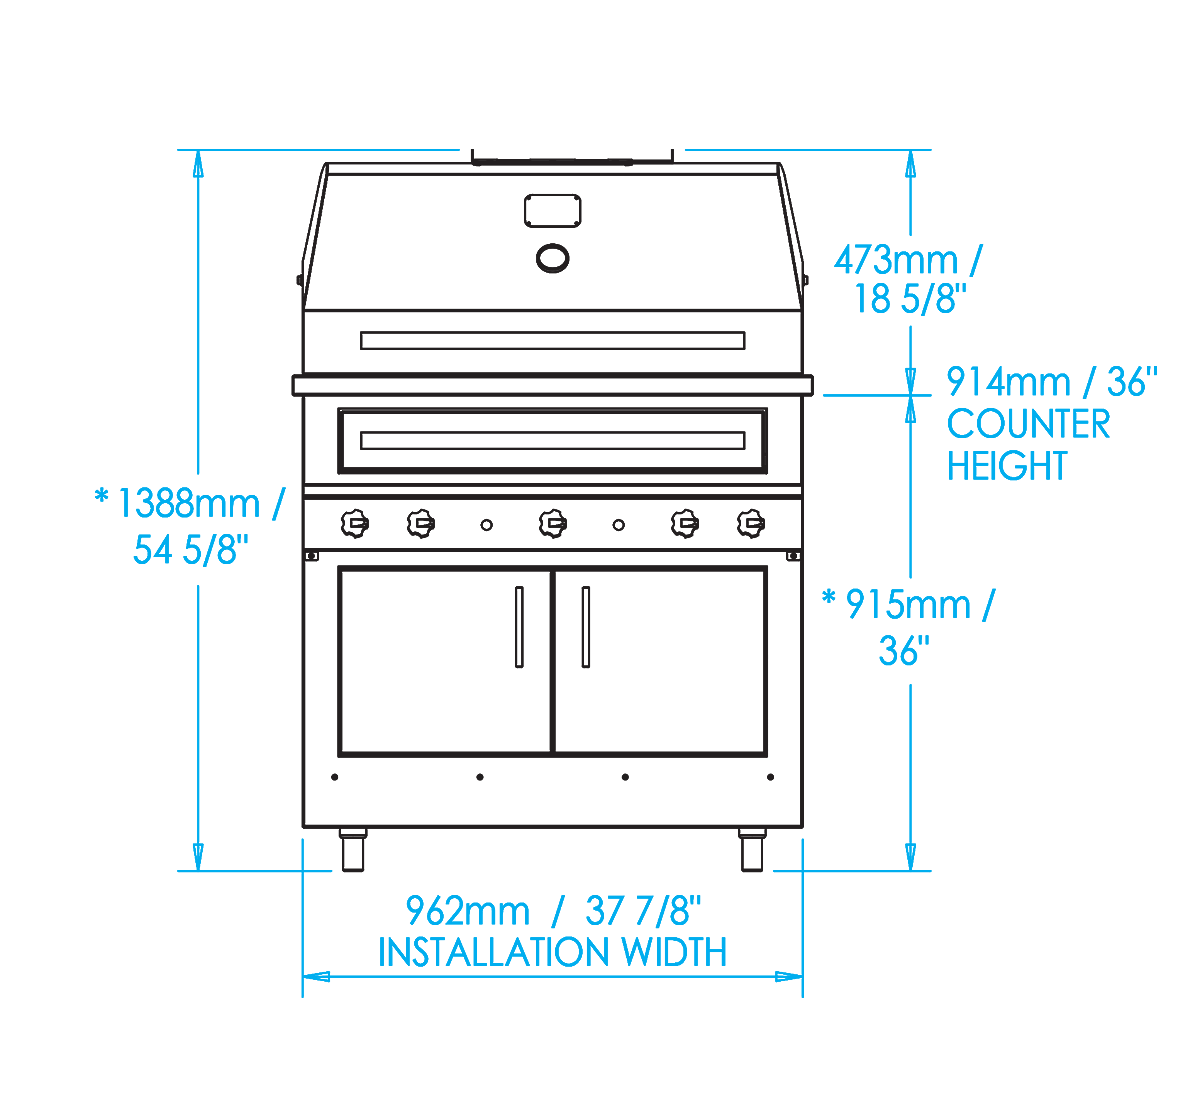 K750 Built-in Hybrid Fire Grill Dimensions Image